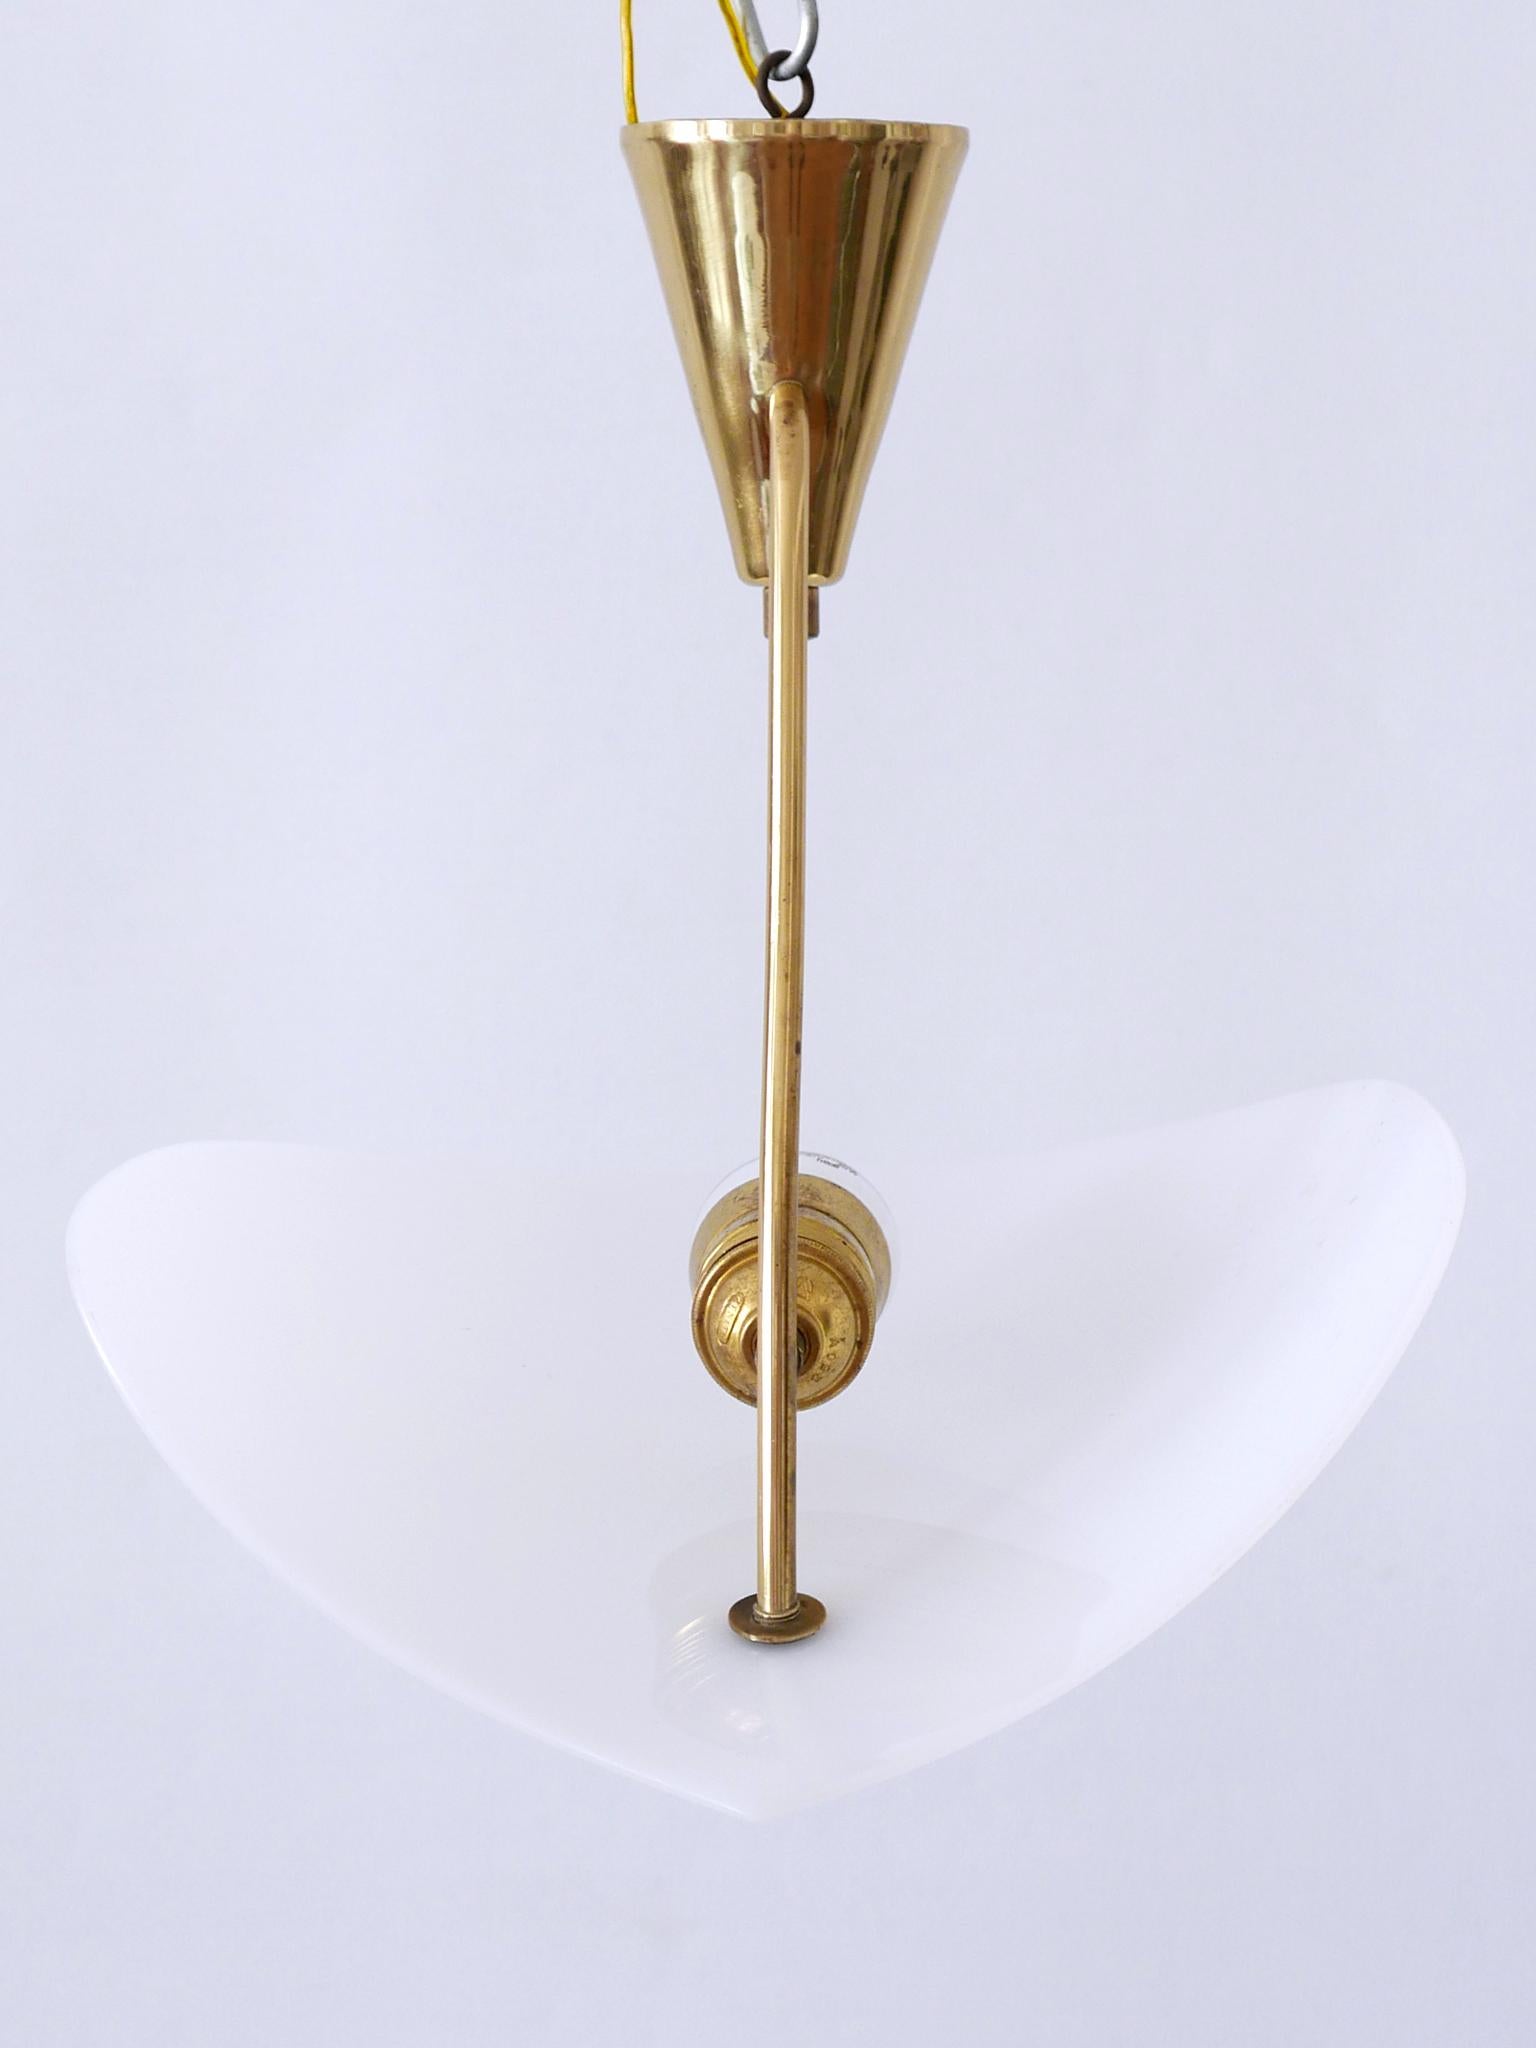 Extremely Rare and Elegant Lucite & Brass Ceiling Lamp Germany 1960s For Sale 6